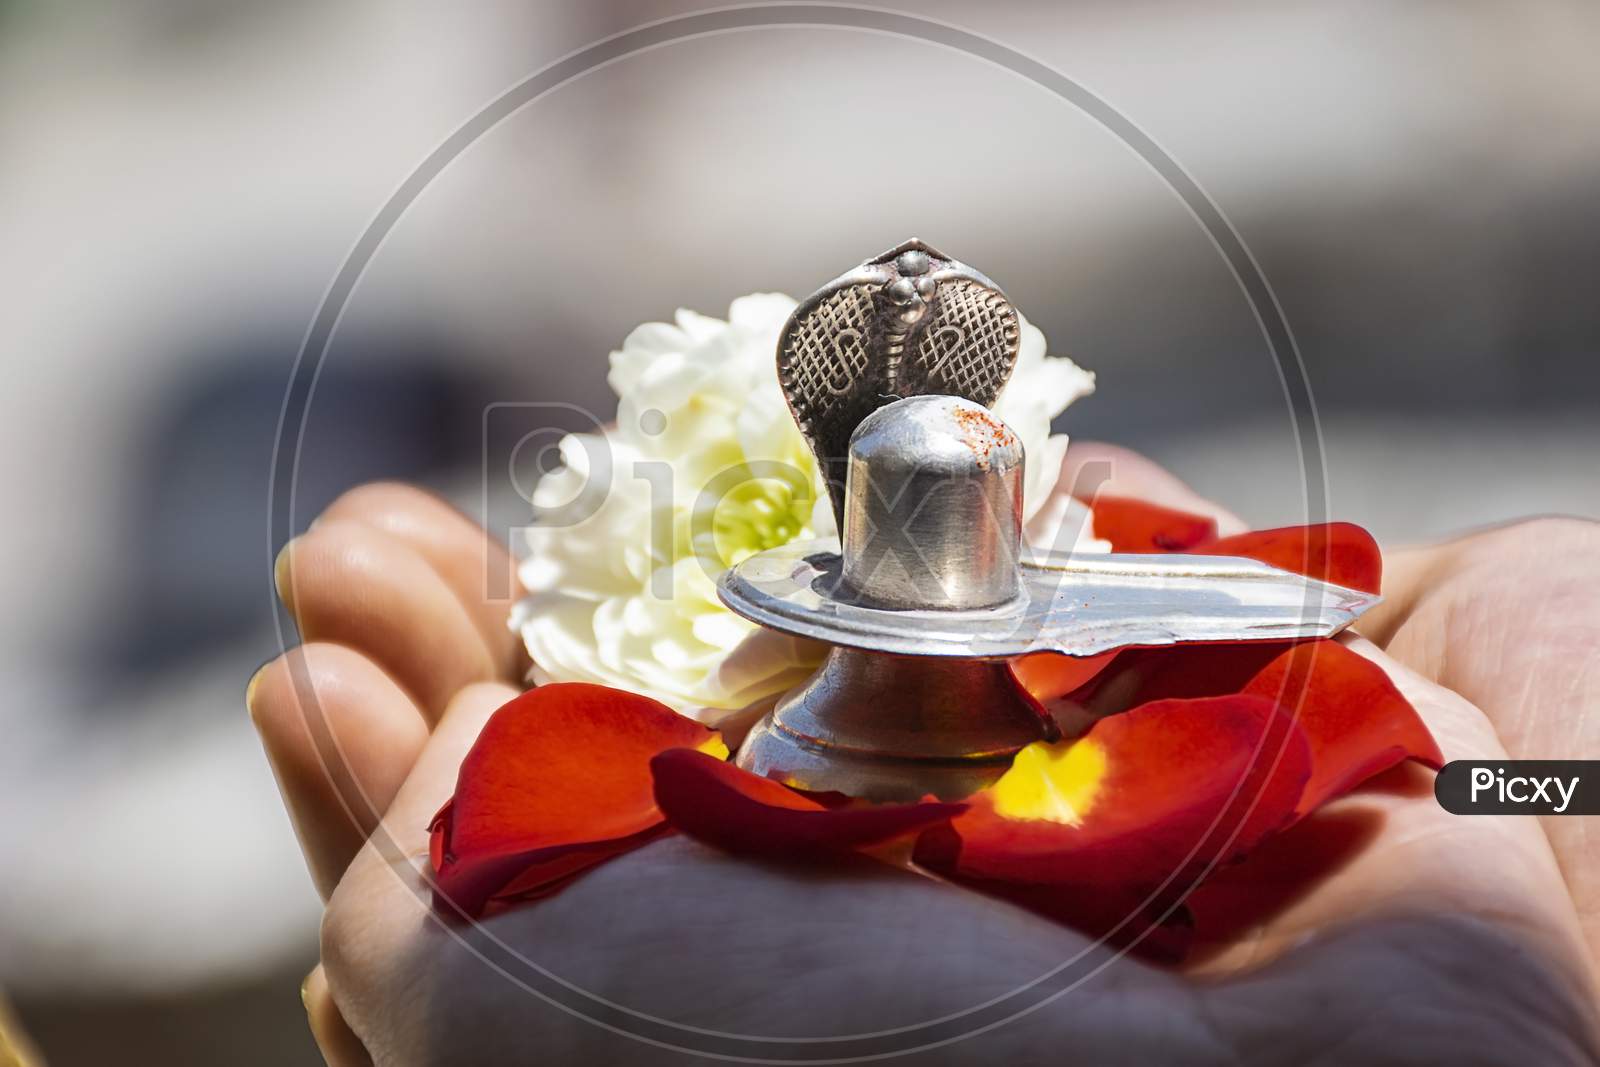 Stock Photo Of A Man Holding And Worshiping Silver Shivlinga Which Is Icon Of Lord Shiva On The Occasion Of Mahashivratri , Flowers Around The Shivlinga In Bright Sunlight At Bangalore City Karnataka India.